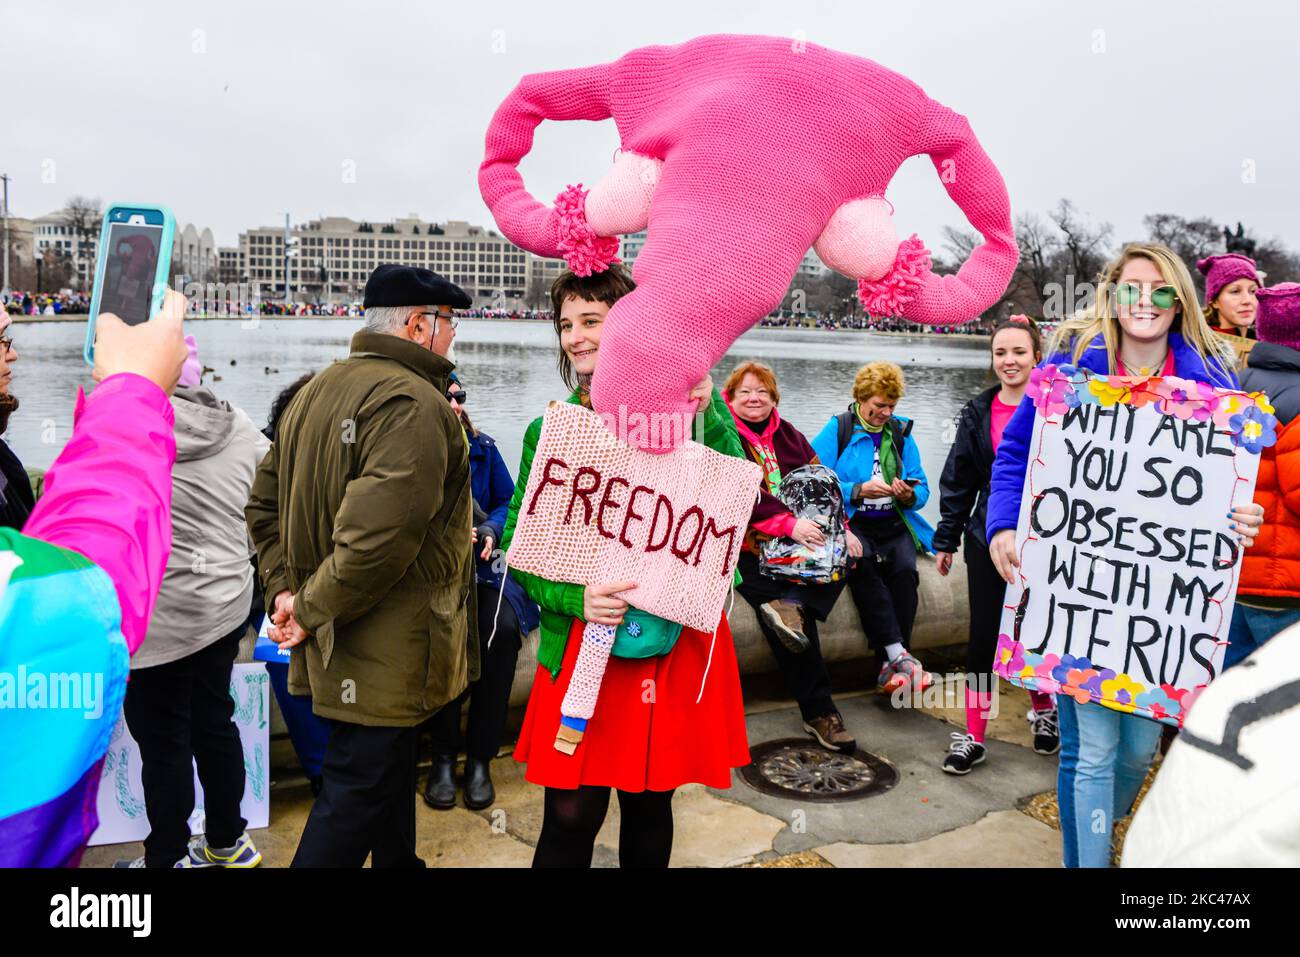 Protest by woman holding big knitted pink uterus  with Fallopian tubes, with sign for Freedom, Fight for Abortion rights, Washington DC Stock Photo